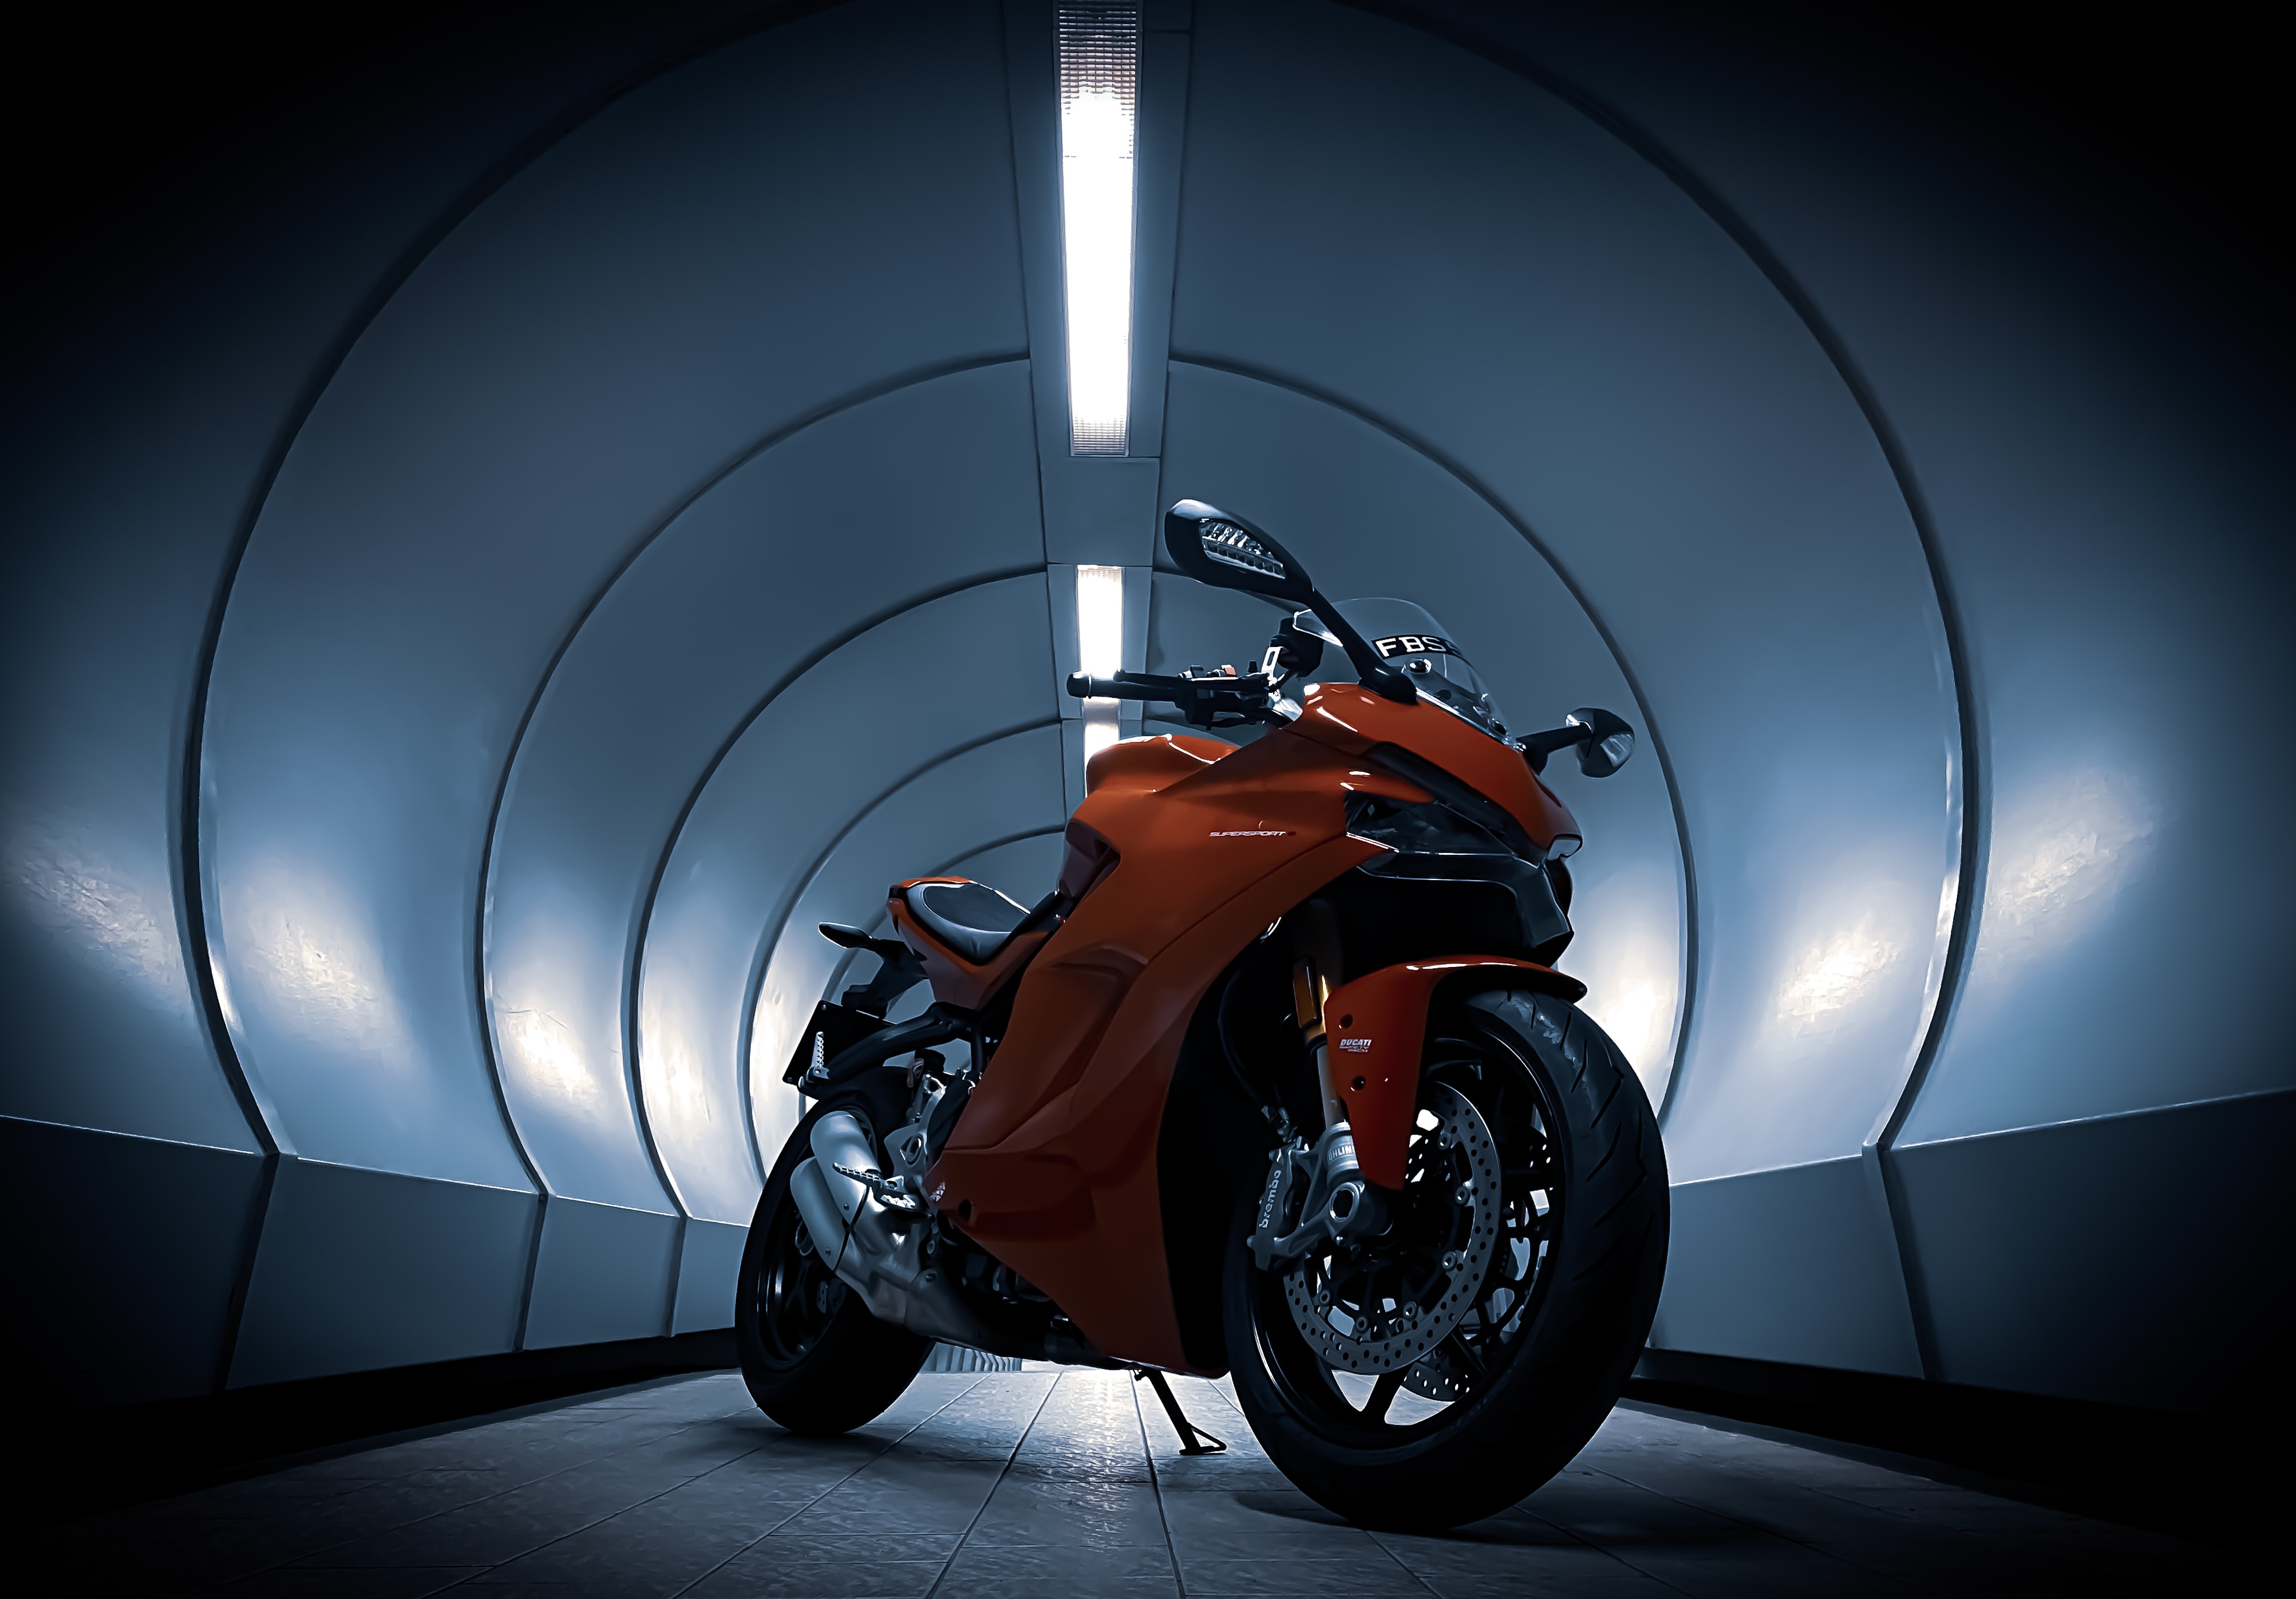 ducati, tunnel, motorcycles, red, motorcycle